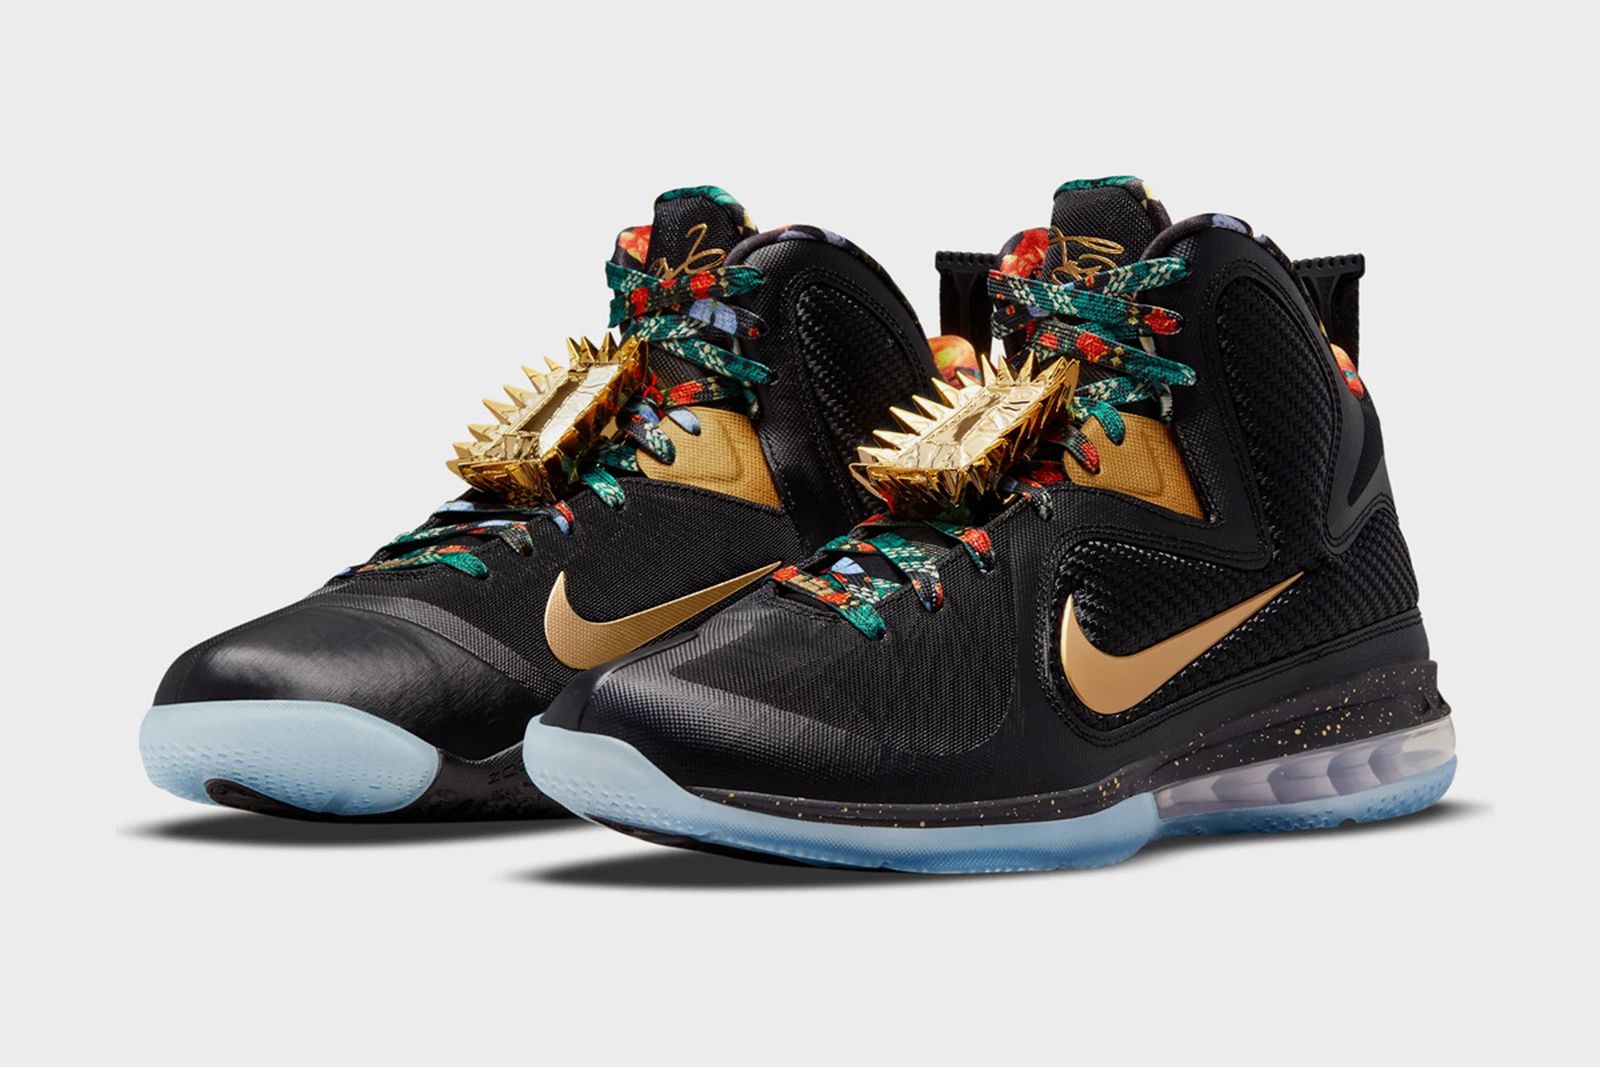 The Nike LeBron 9 'Watch The Throne' Retro Gets A Release Date 